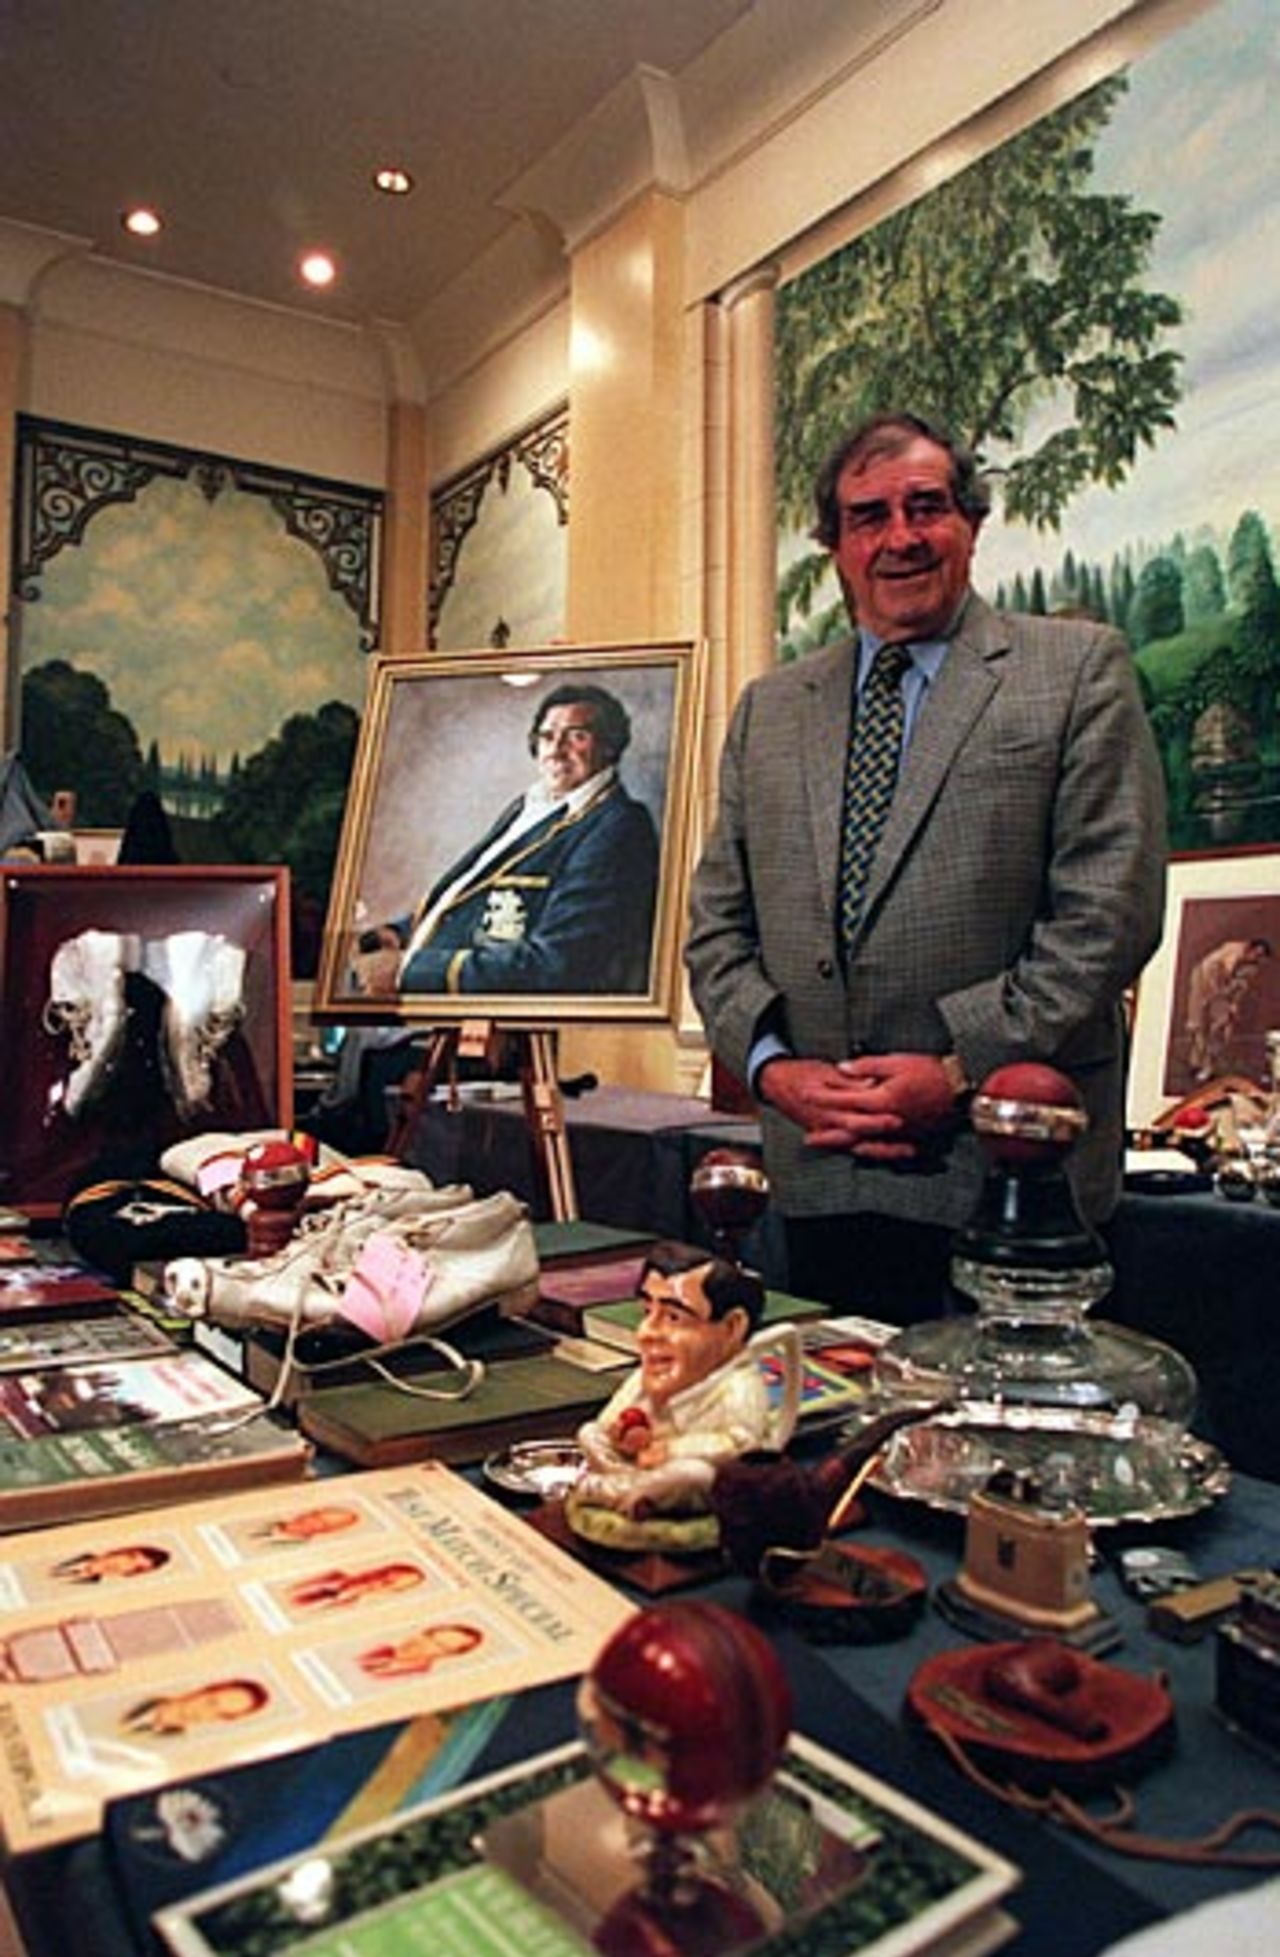 Fred Trueman stands with his memorabilia collection prior to The Fiery Fred Collection Auction being held at the Grovesnor Hotel, London, February 6, 2001